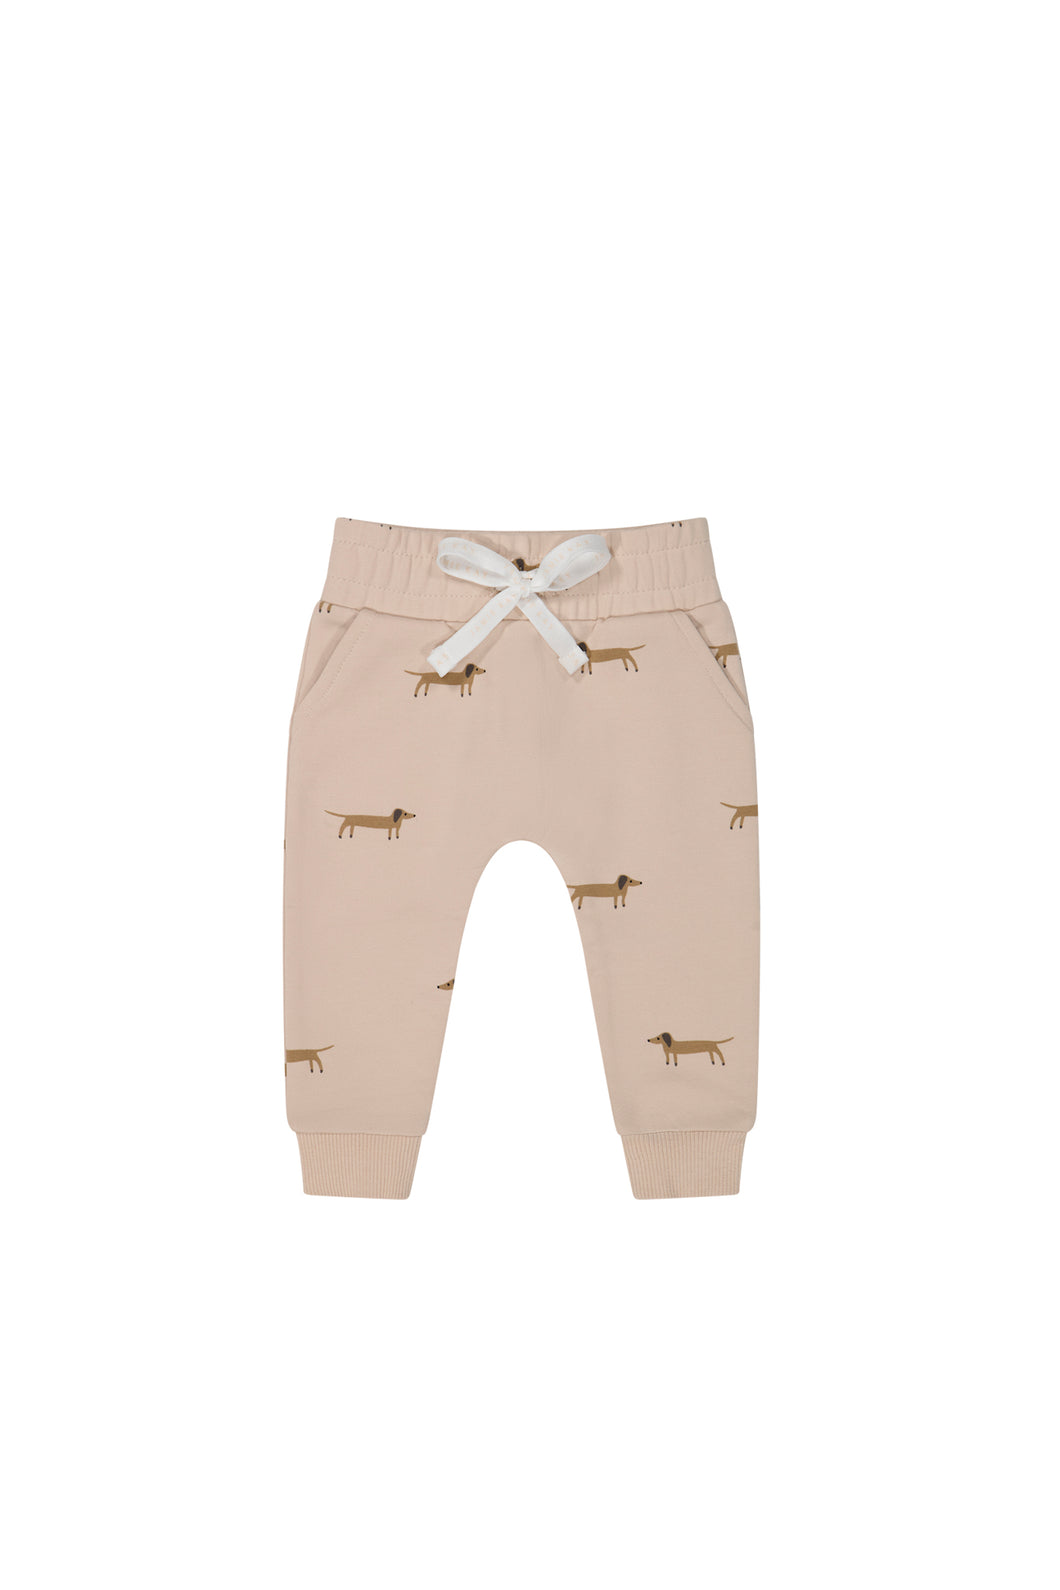 Organic Cotton track pant from Jamie Kay. Beige sweatpant with dogs print. 